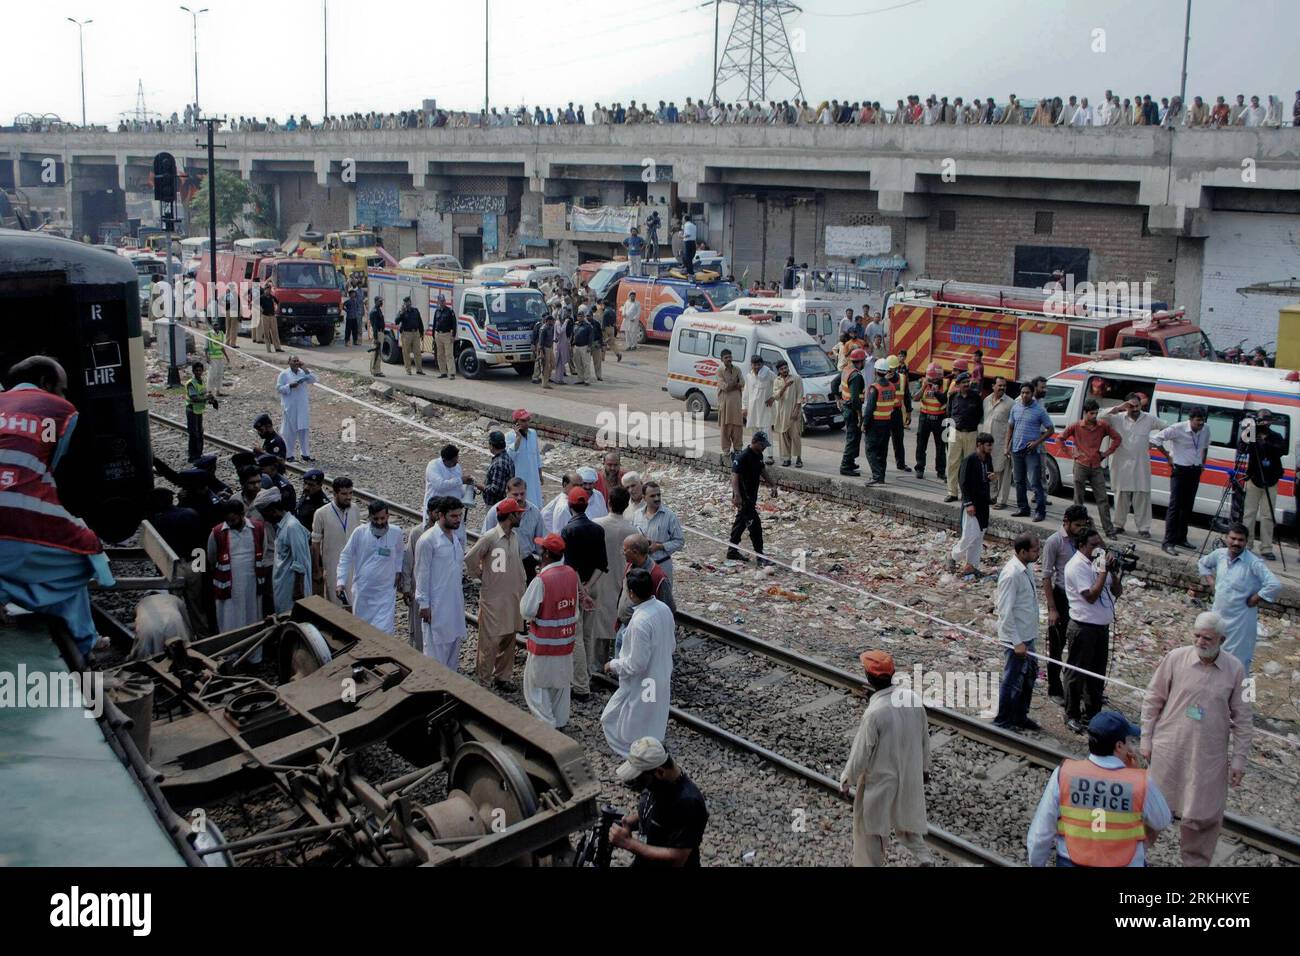 Bildnummer: 55857827  Datum: 30.08.2011  Copyright: imago/Xinhua (110830) -- LAHORE, Aug. 30, 2011 (Xinhua) -- Pakistani railway and security officials work at the site of a train collision in eastern Pakistan s Lahore, on Aug. 30, 2011. At least five were killed and 25 others were injured when two trains collided on Tuesday morning in Lahore, reported local Urdu TV channel DAWN. (Xinhua/Sajjad) PAKISTAN-LAHORE-TRAIN COLLISION PUBLICATIONxNOTxINxCHN Gesellschaft Verkehr Bahn Zug Zugunglück Unfall xtm 2011 quer  o0 Wrack Schäden    Bildnummer 55857827 Date 30 08 2011 Copyright Imago XINHUA  Lah Stock Photo